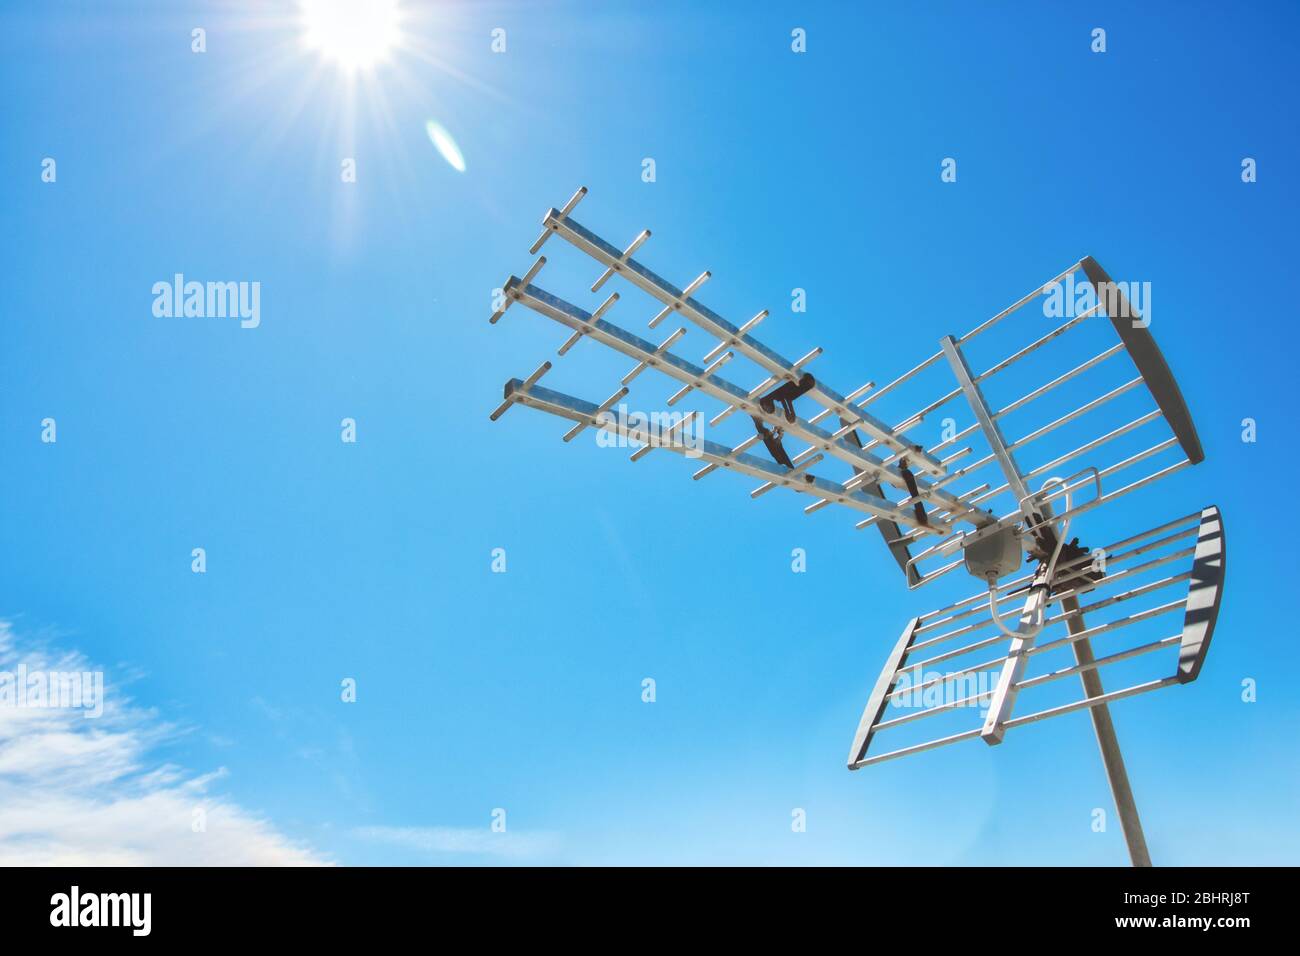 Television antenna on a rooftop against a clear sunny blue sky Stock Photo